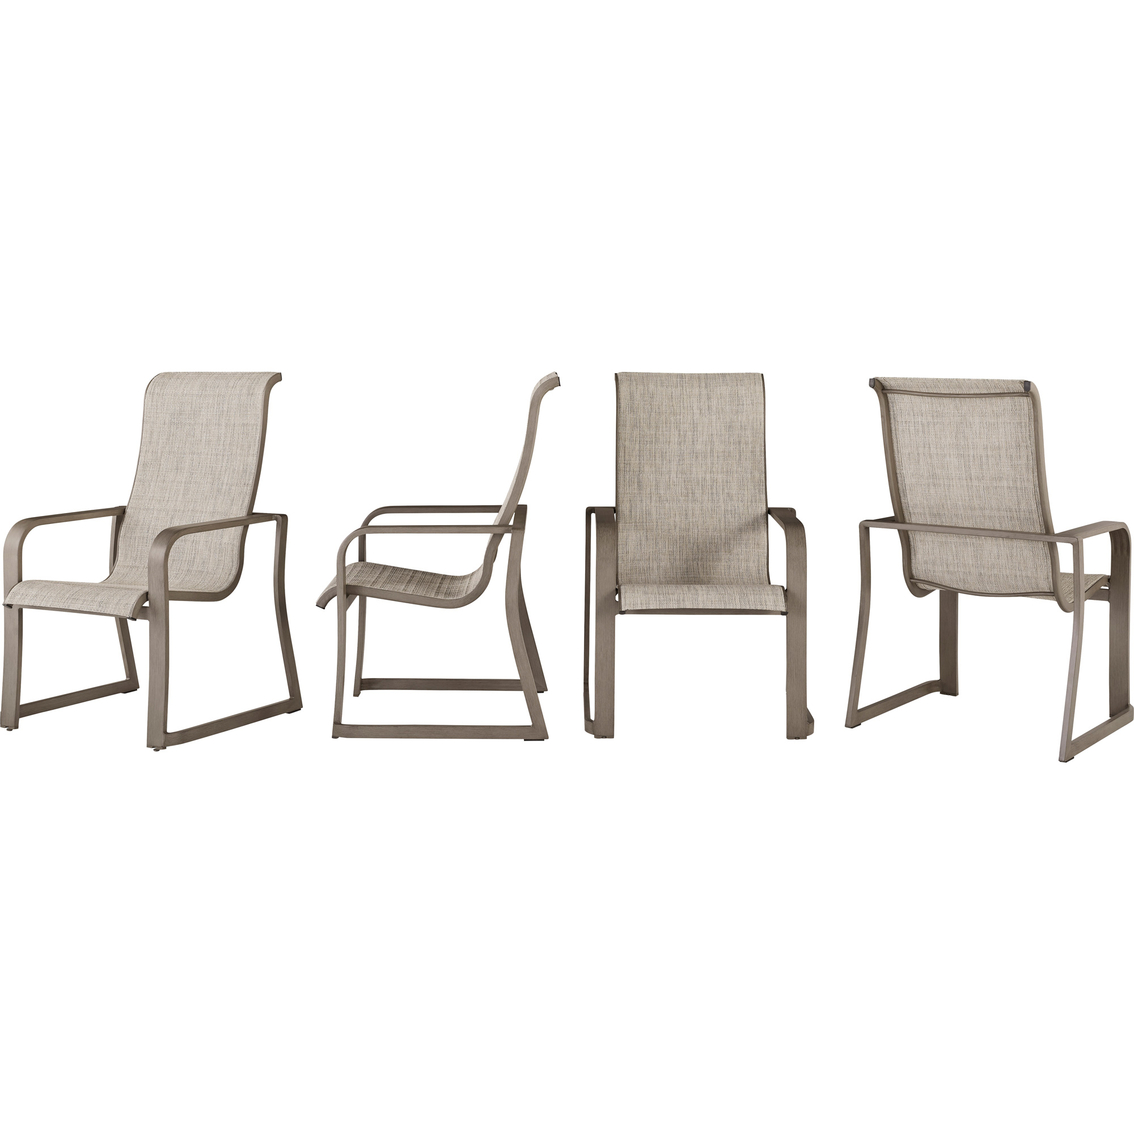 Signature Design by Ashley Beach Front 7pc Outdoor Dining Set with Sling Chairs - Image 2 of 5